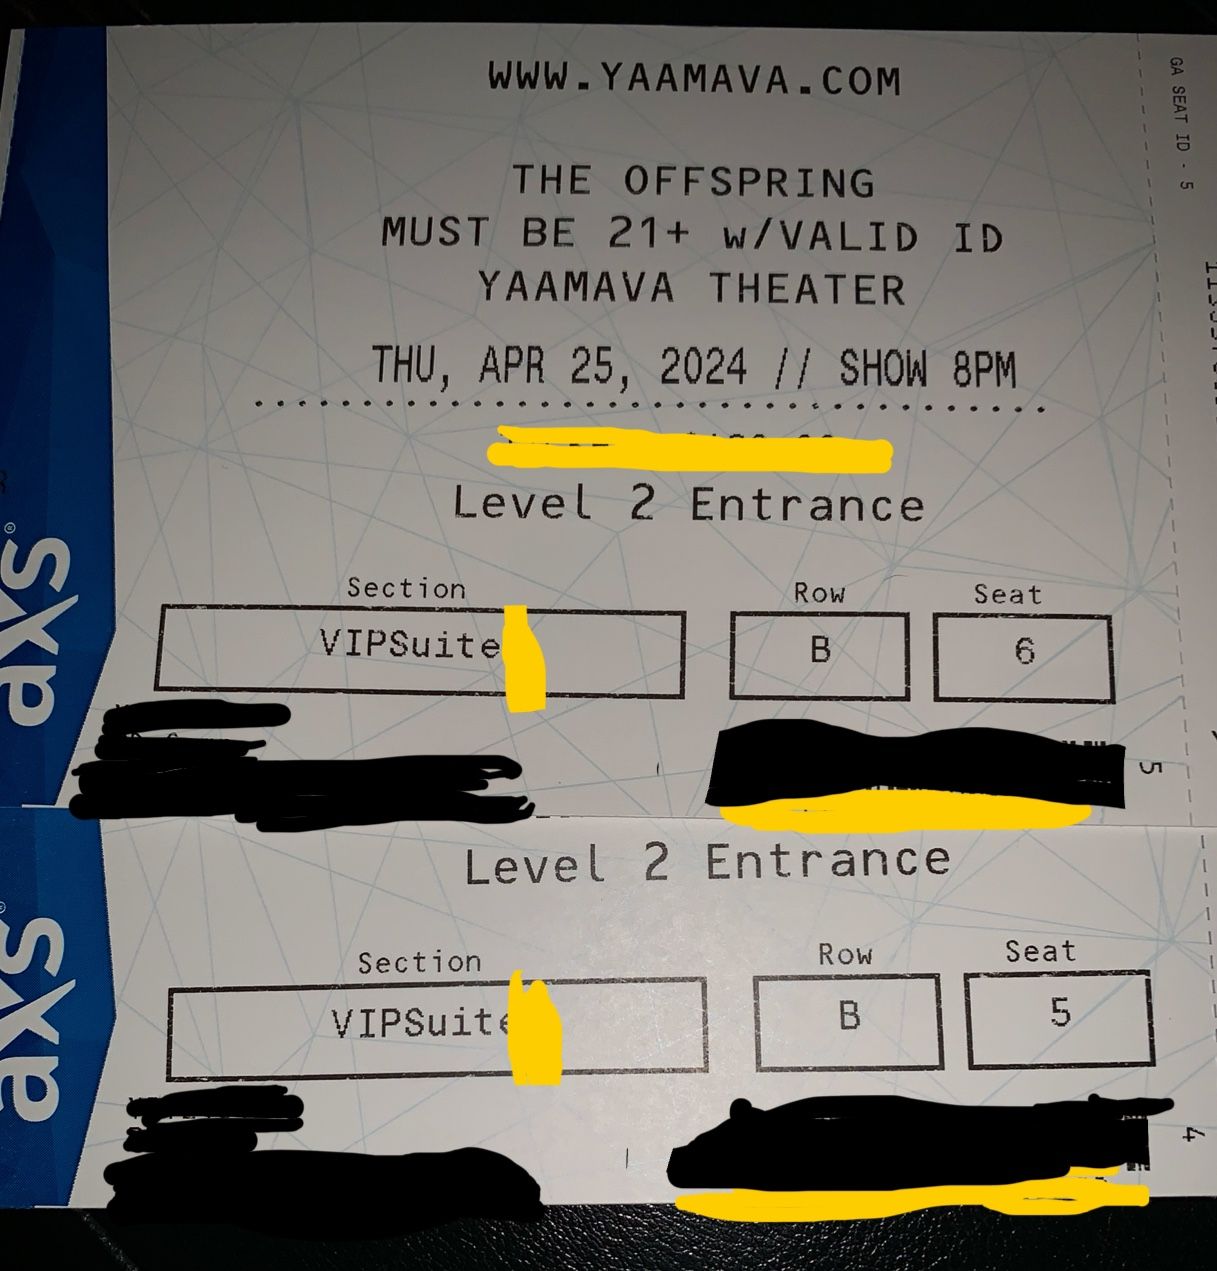 $800- Suite  4 “THE OFFSPRING” At Yaamava 8:00 (2 Tix)